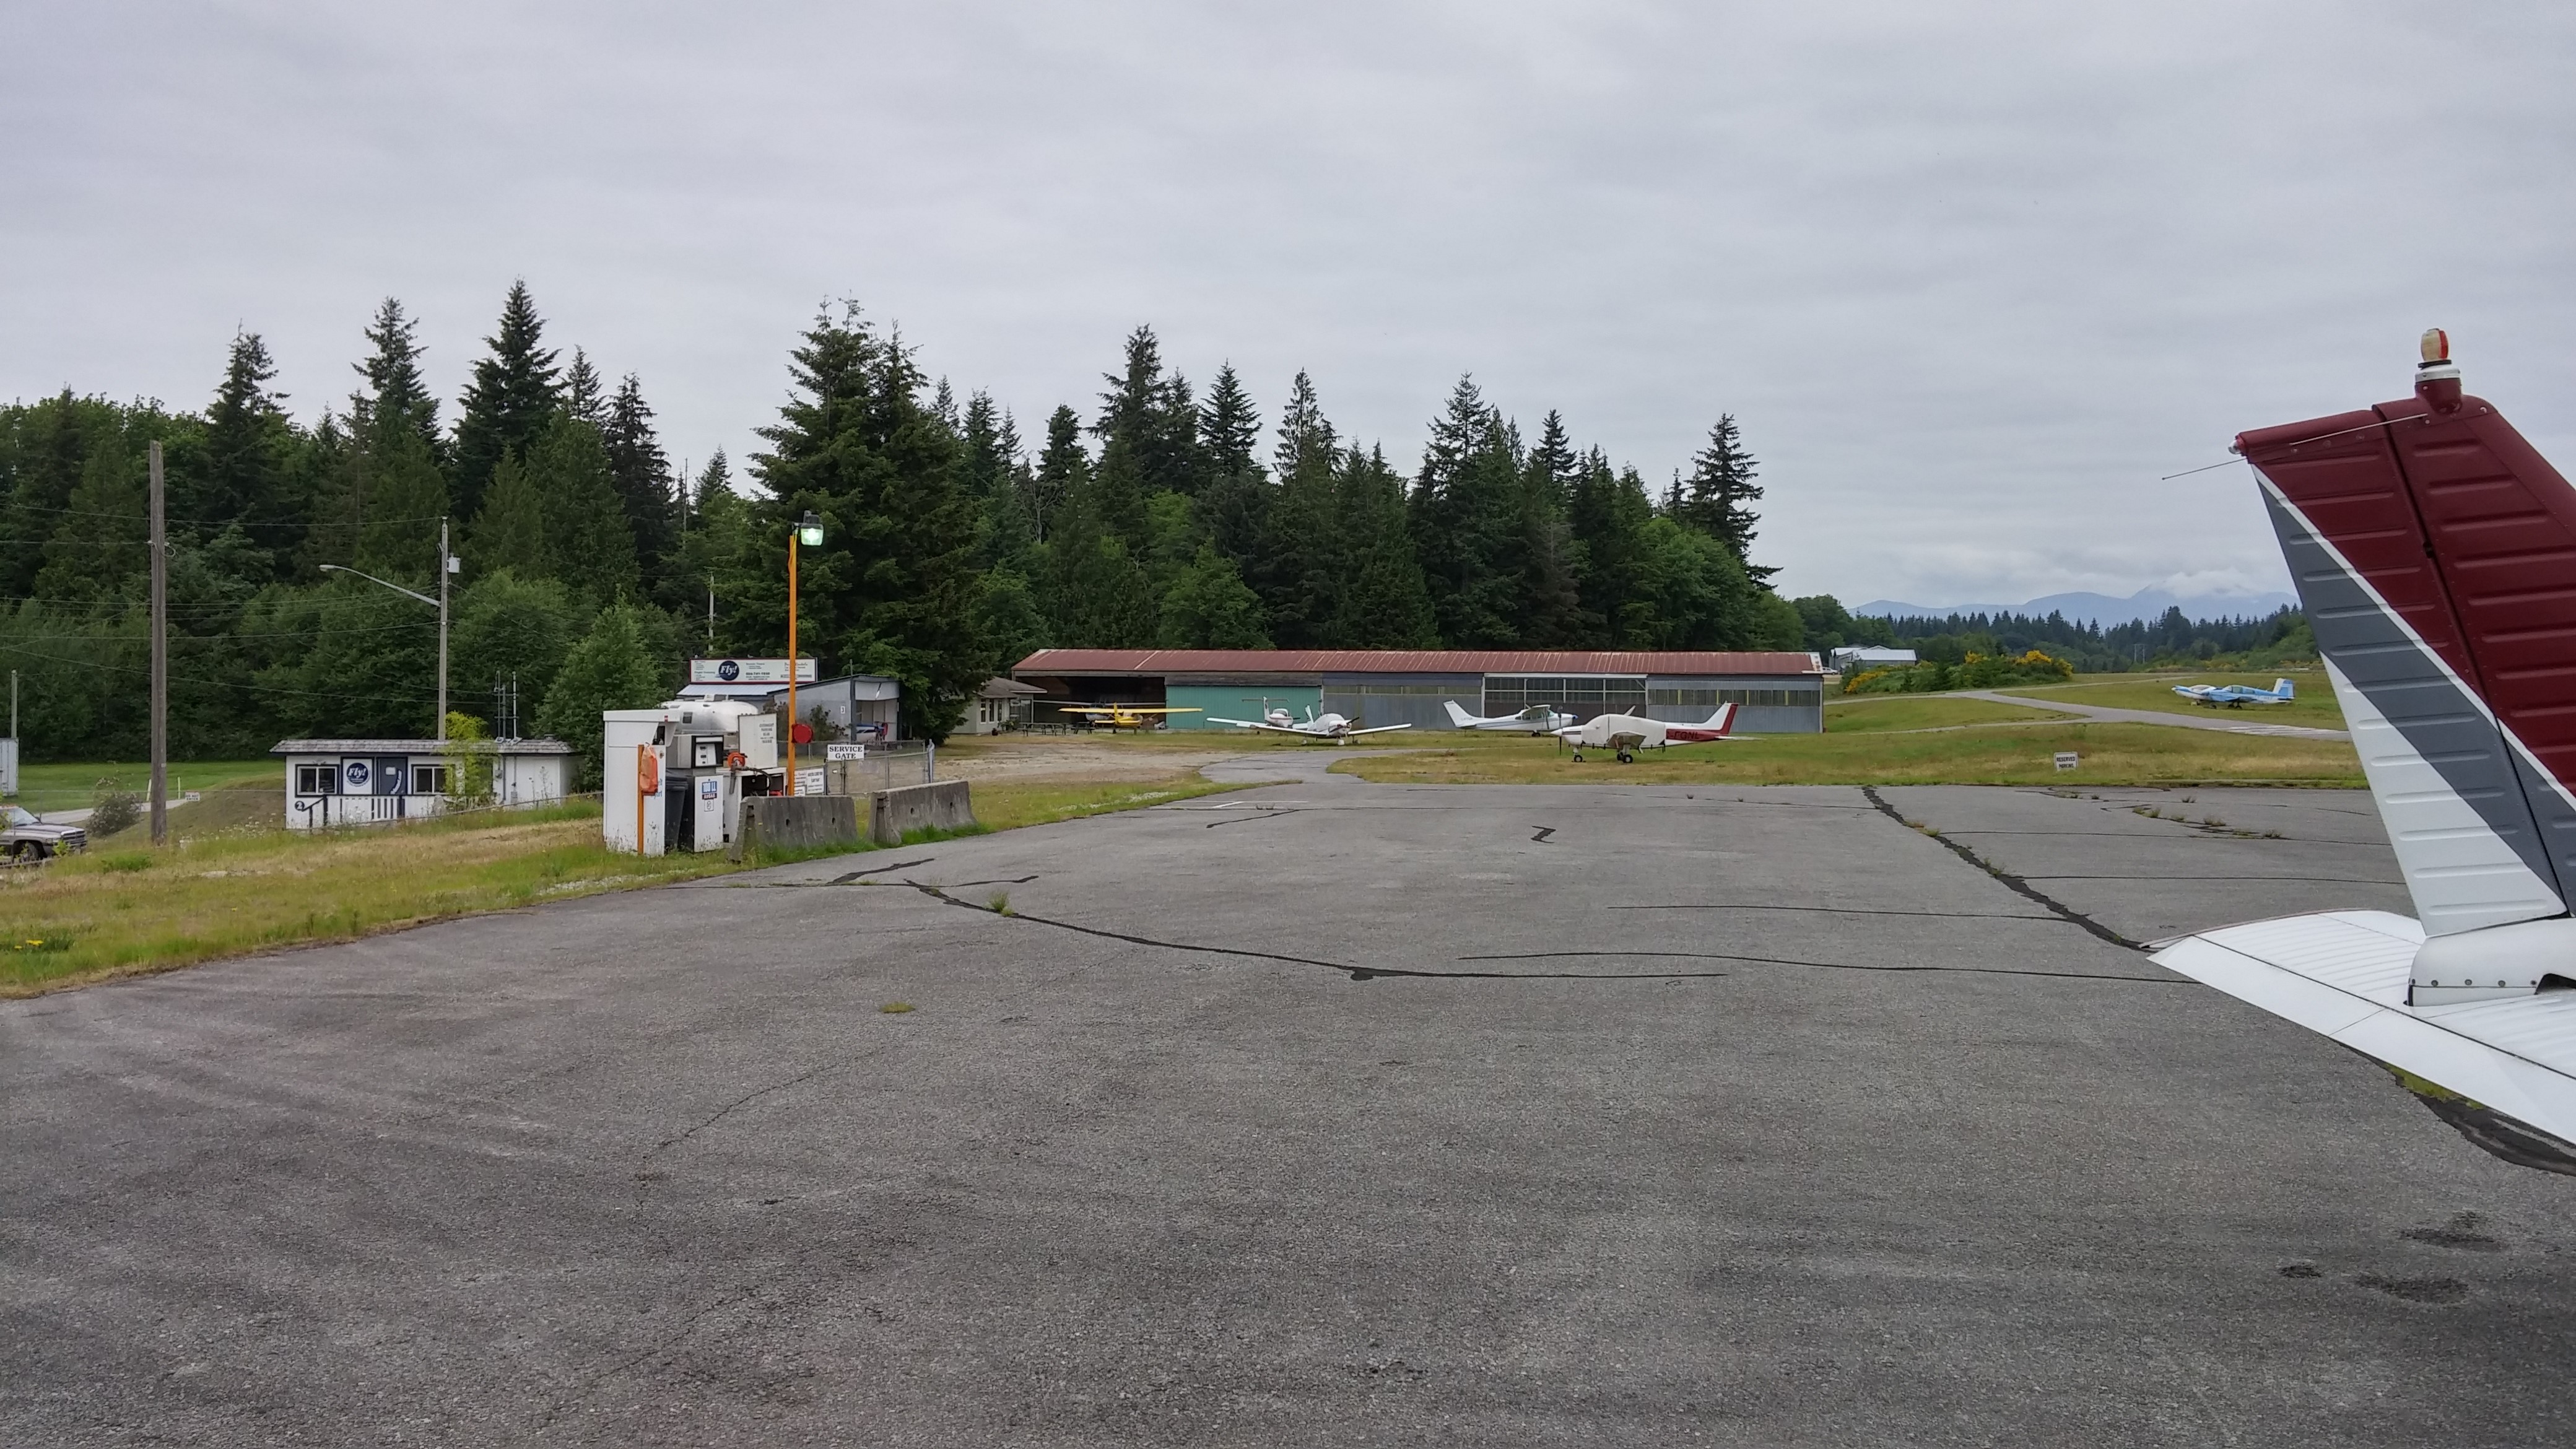 A view of the self-serve fuel station and clubhouse at Sechelt